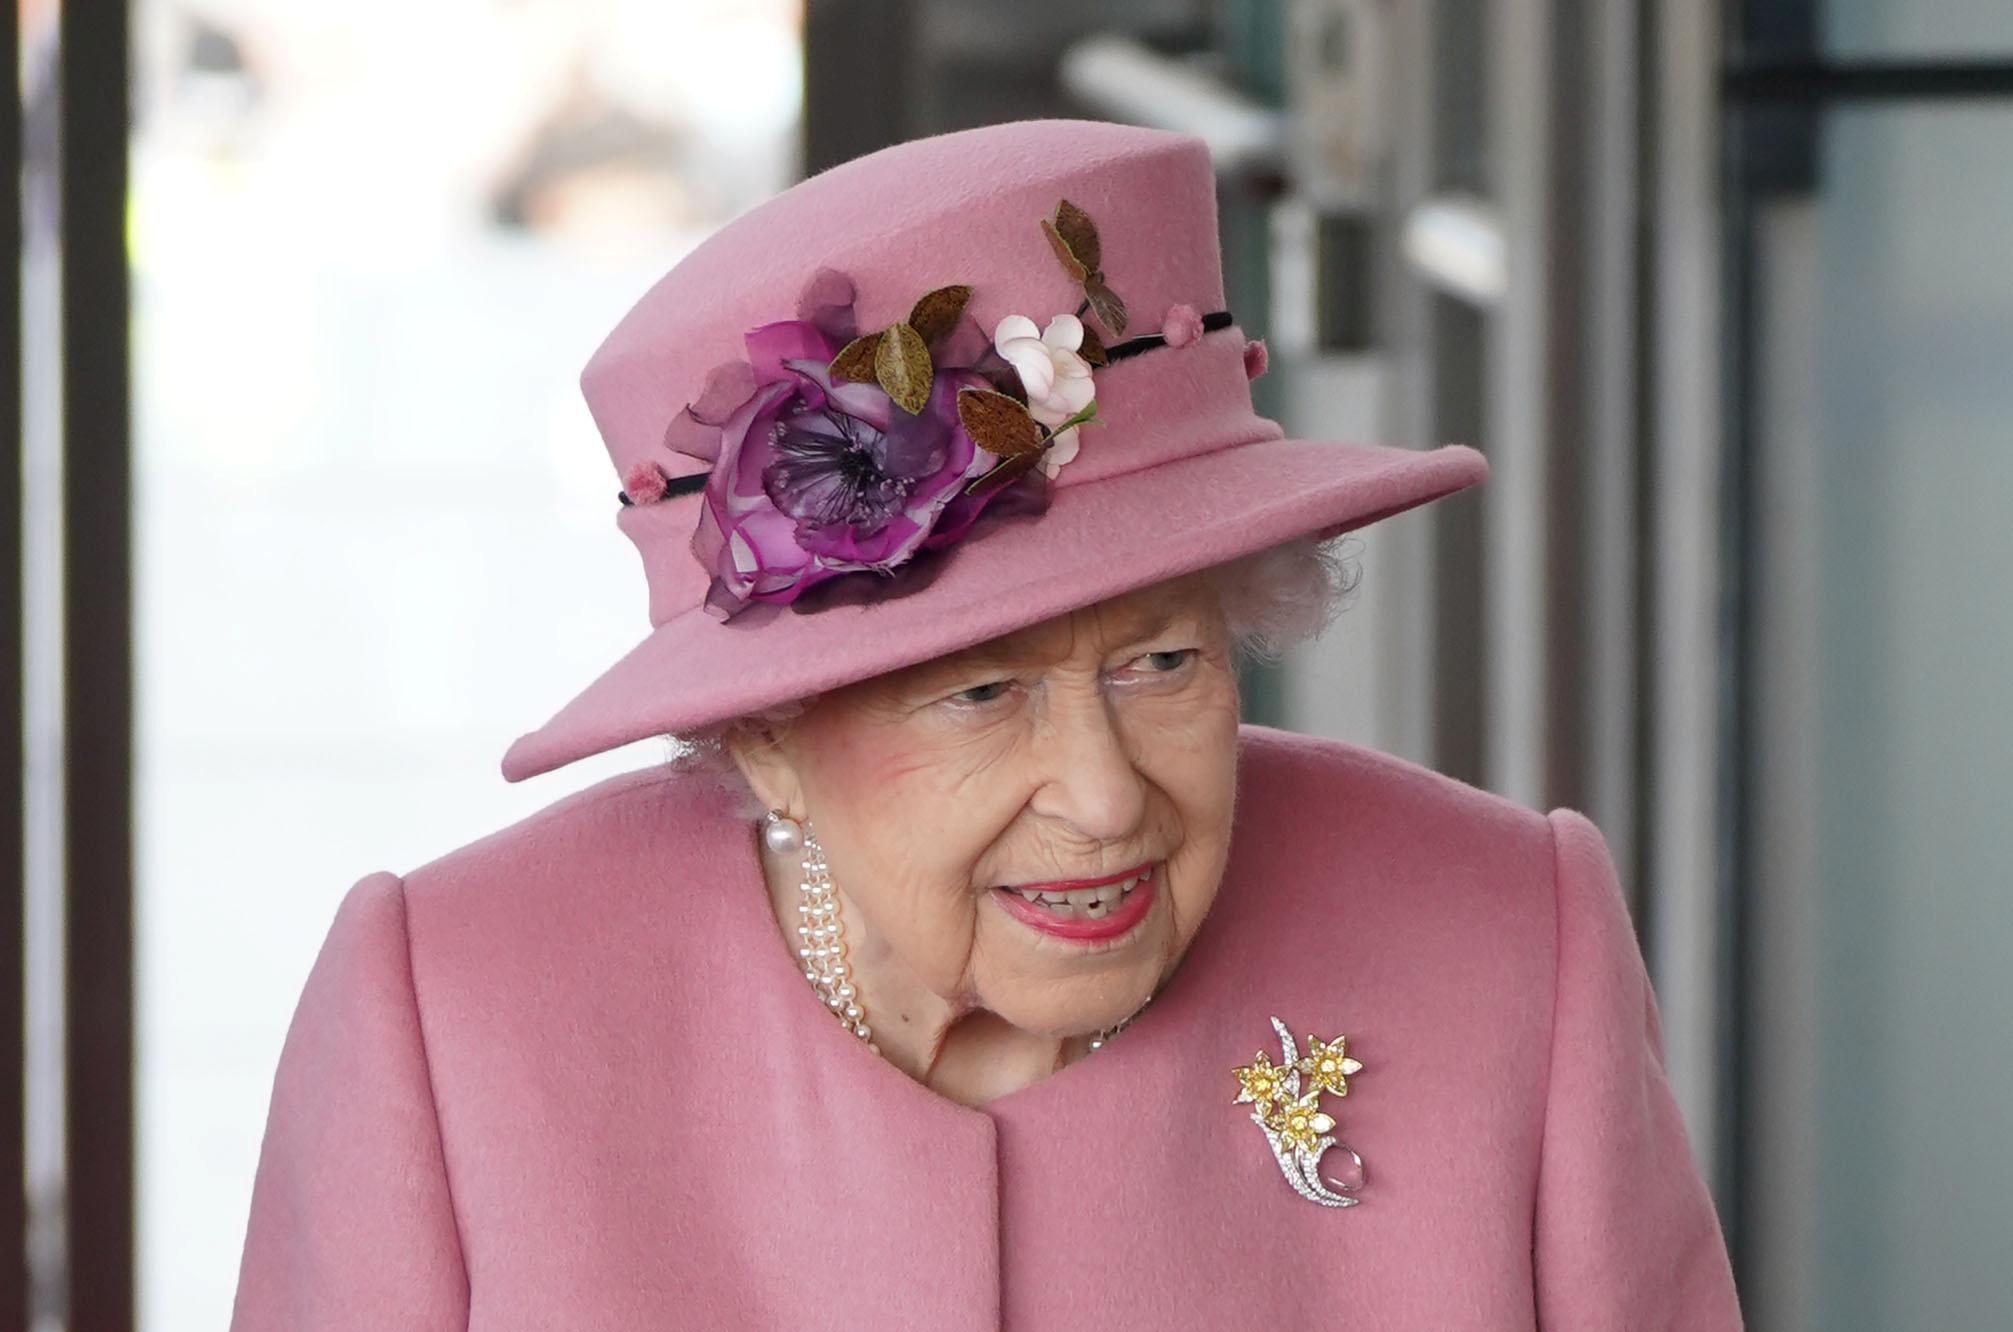 Britain's Queen Elizabeth attends the opening ceremony of the sixth session of the Senedd in Cardiff, Britain October 14, 2021. Jacob King/Pool via REUTERS